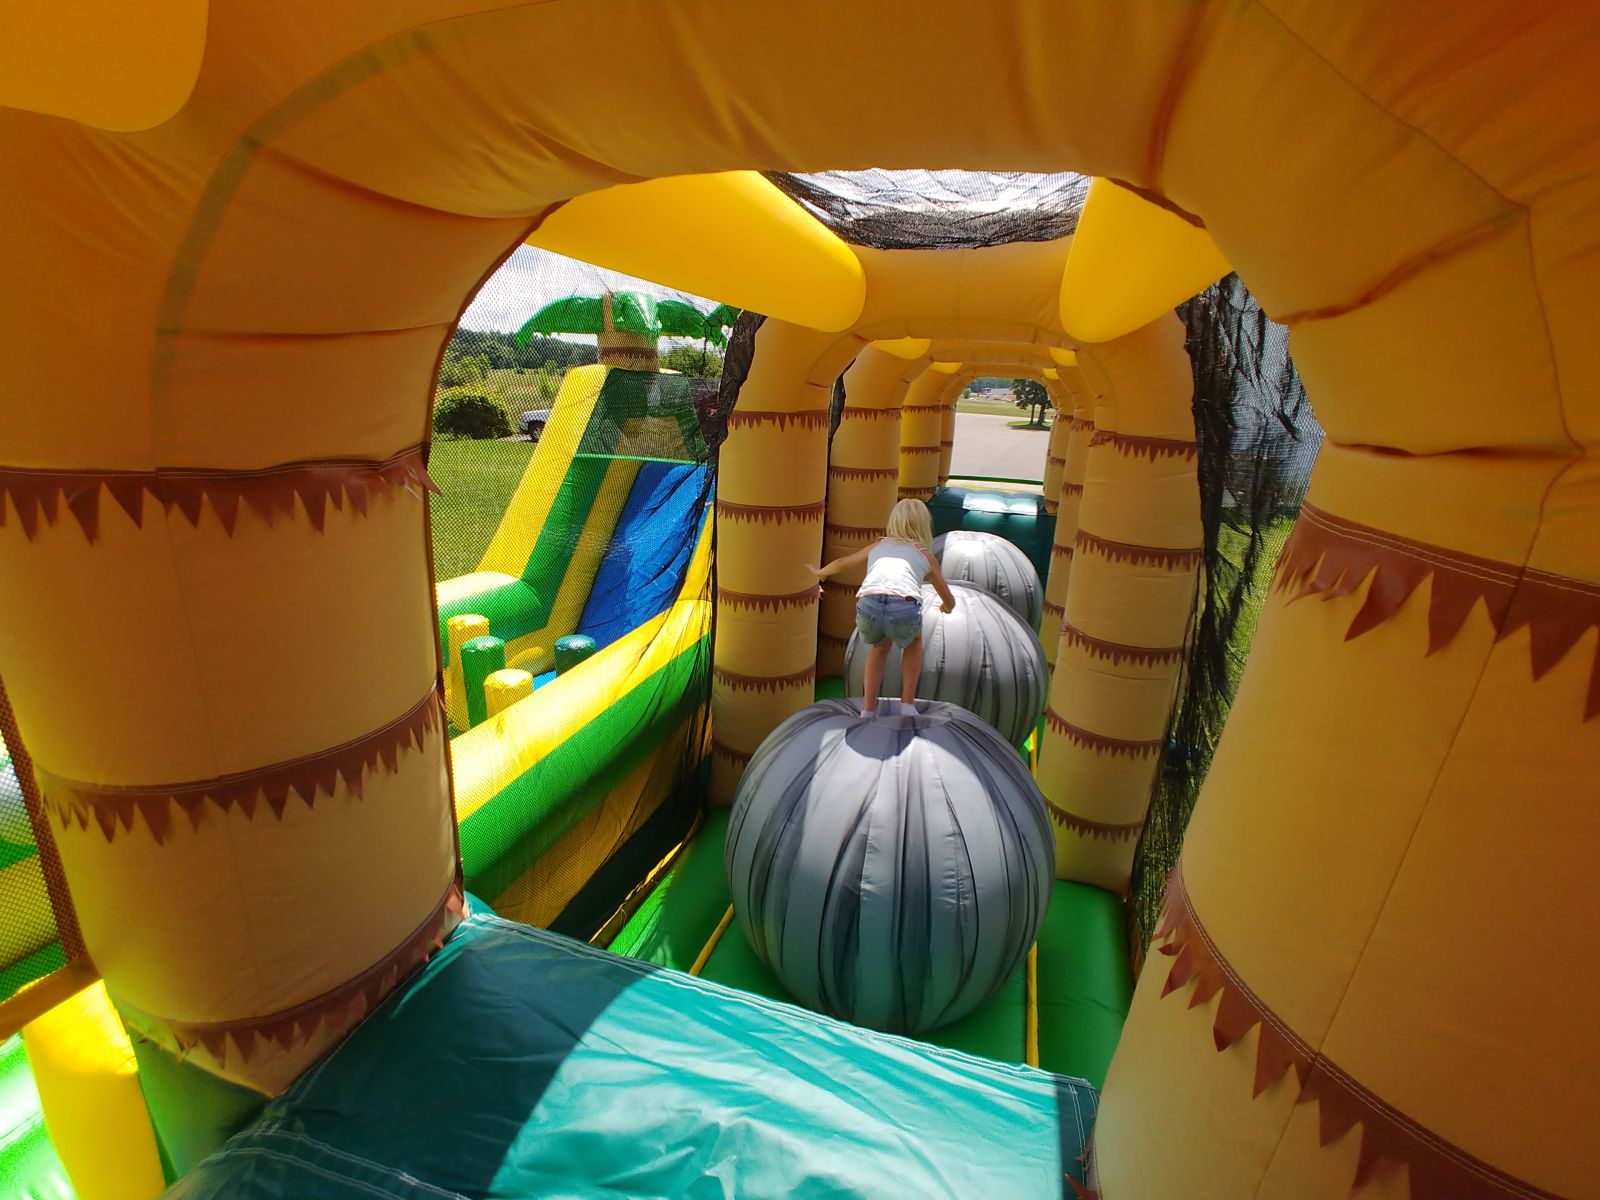 Participant jumping to giant inflatable ball inside obstacle course rental